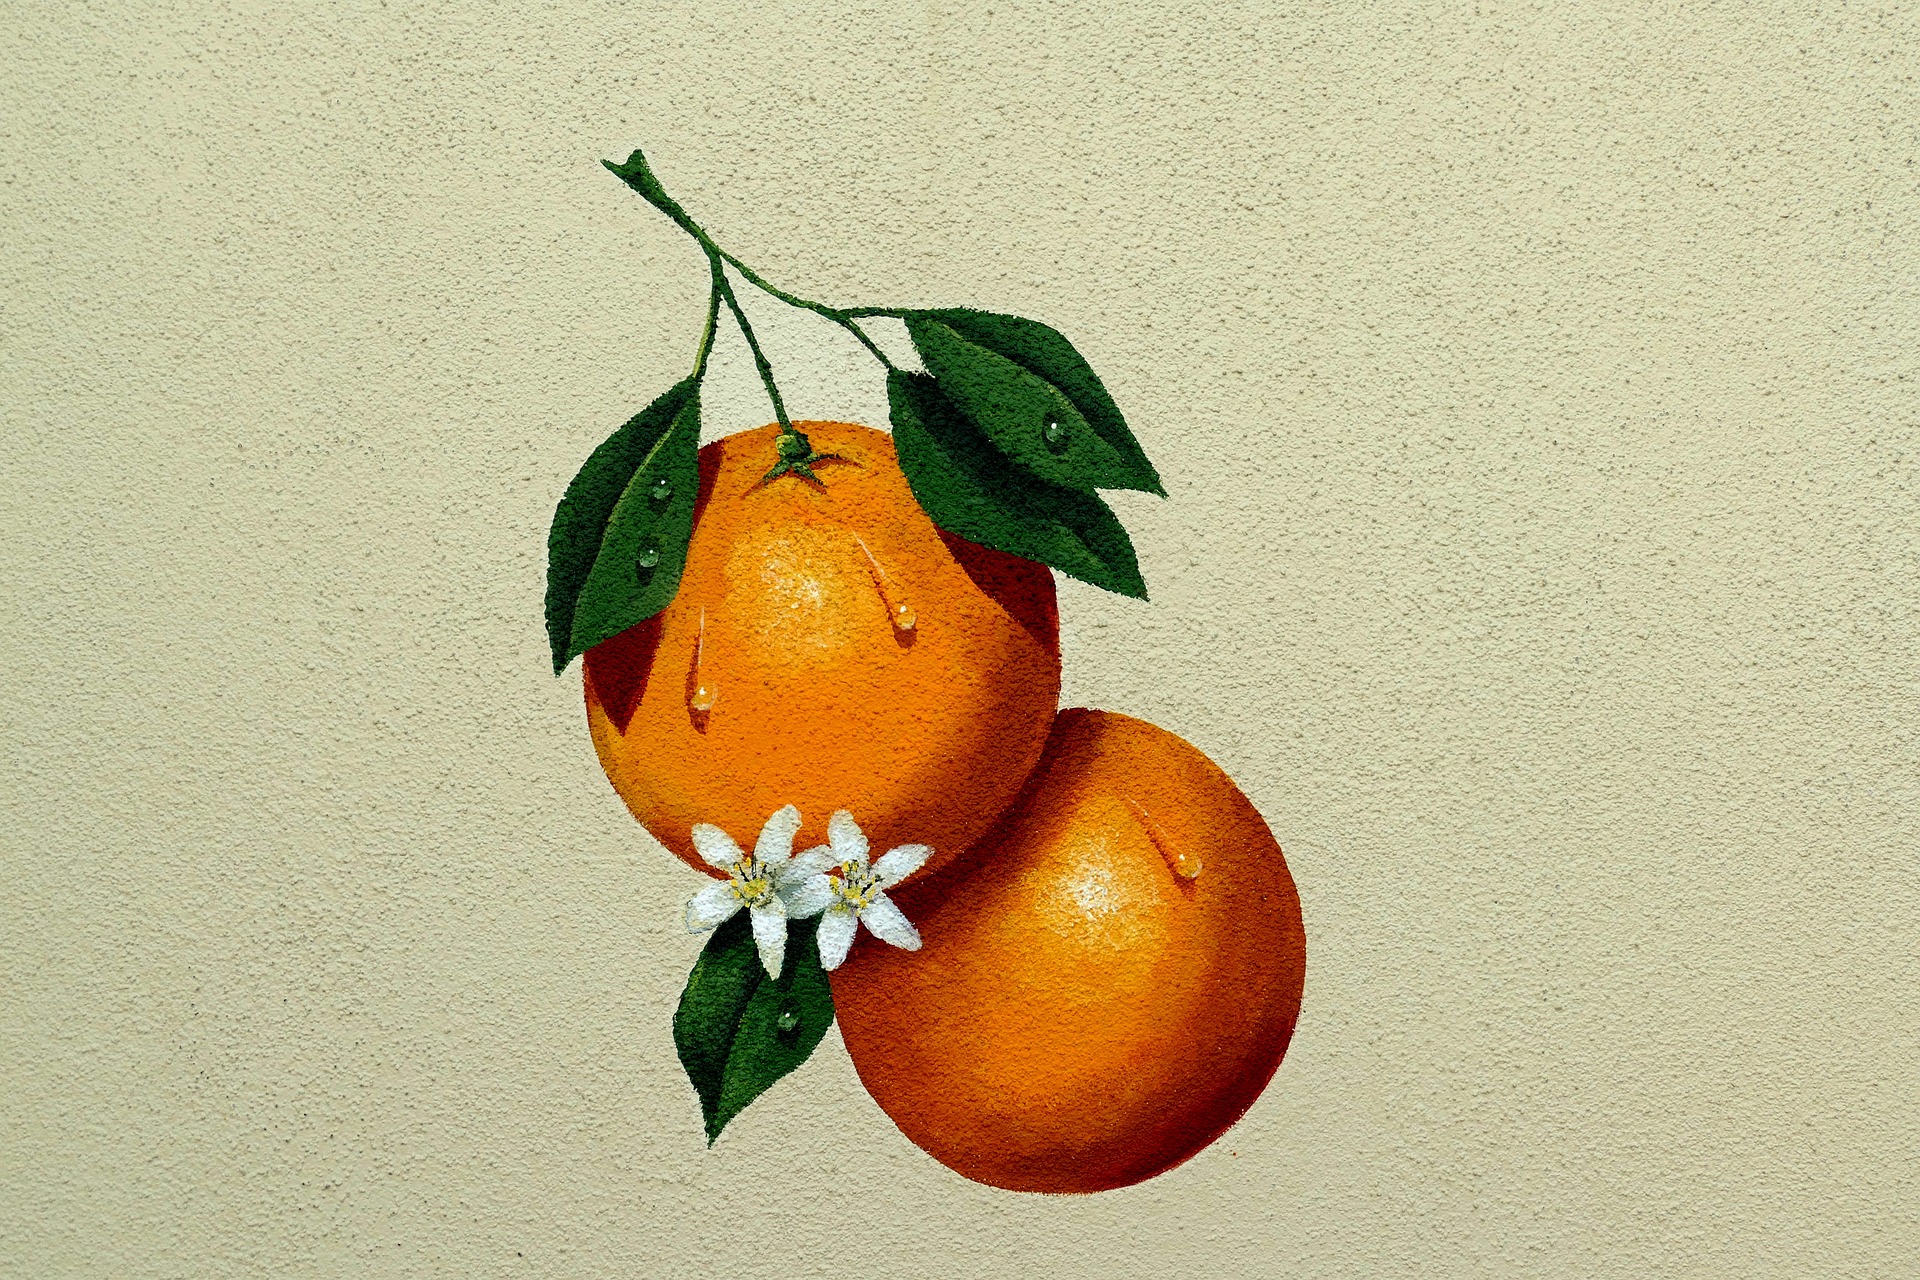 A painting of a tangerine